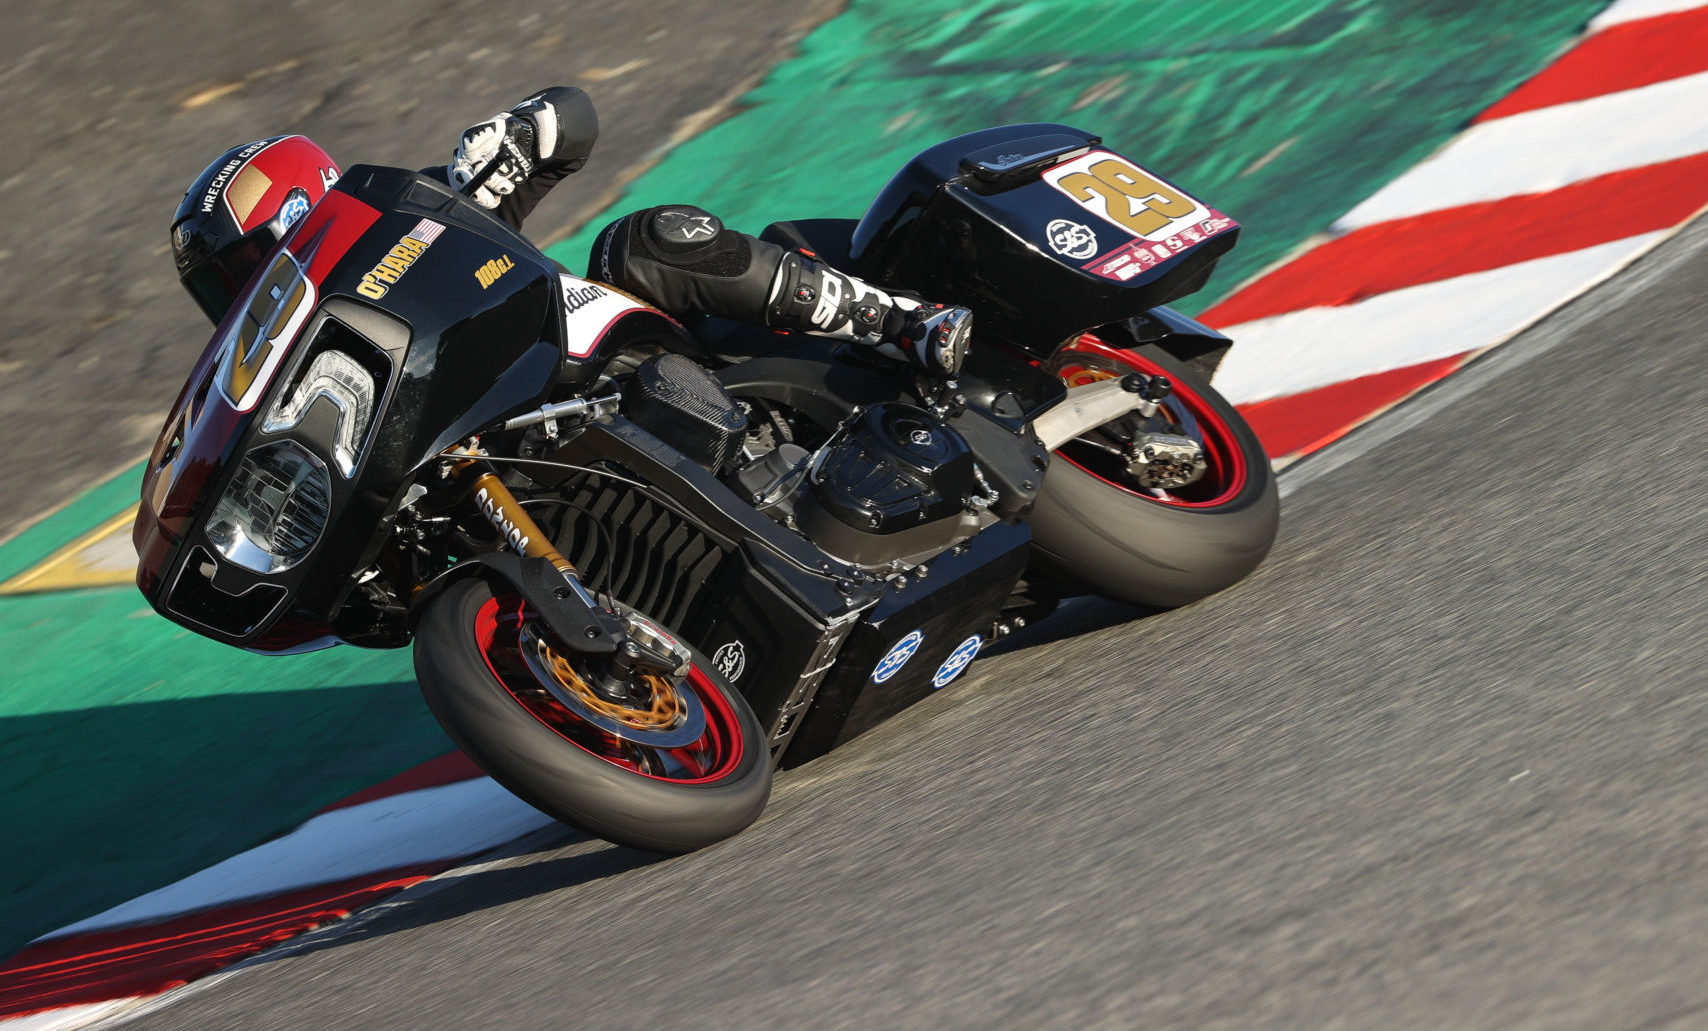 Tyler O'Hara (29) on his S&S Racing Indian Challenger during the inaugural MotoAmerica King of the Baggers event at Laguna Seca. Photo by Brian J. Nelson.